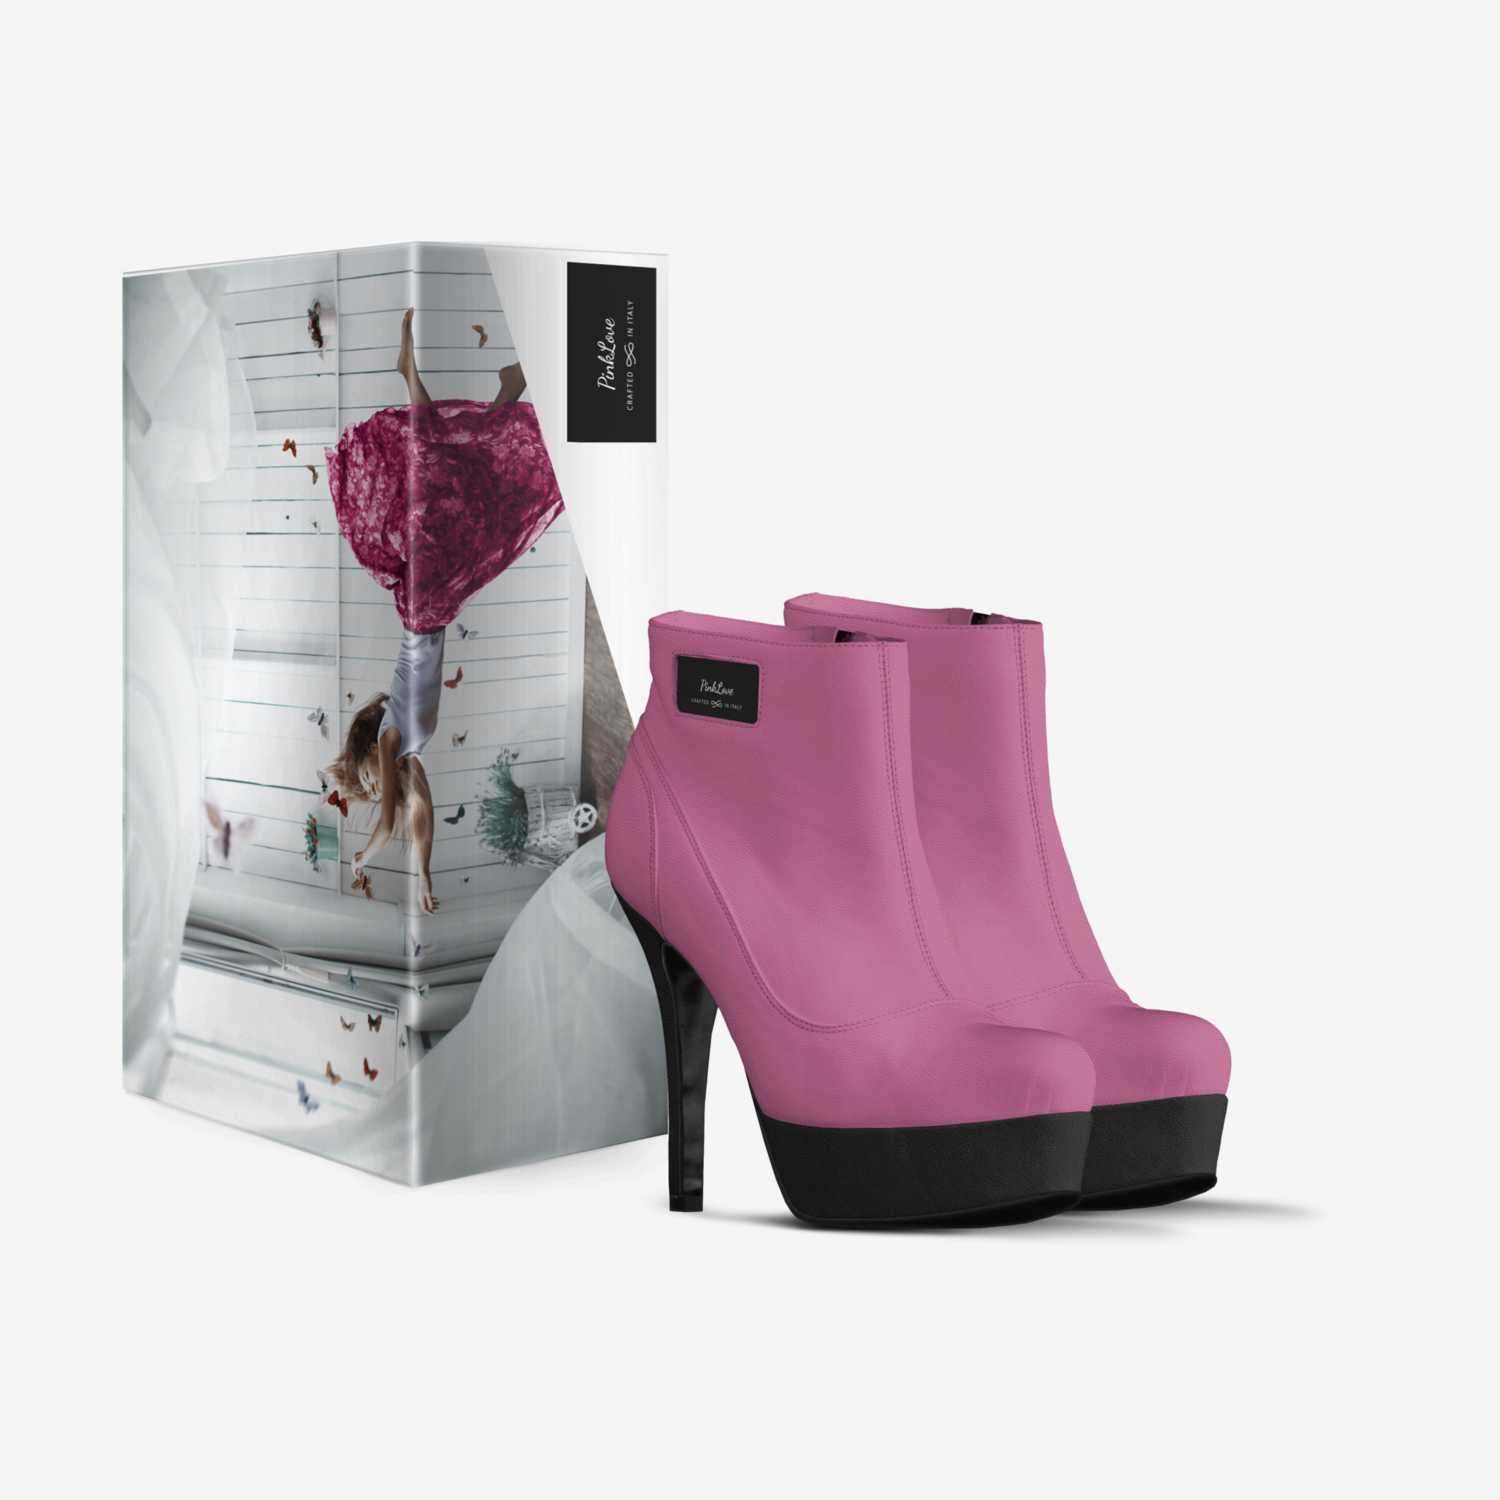 PinkLove custom made in Italy shoes by Kimberly Baxter | Box view